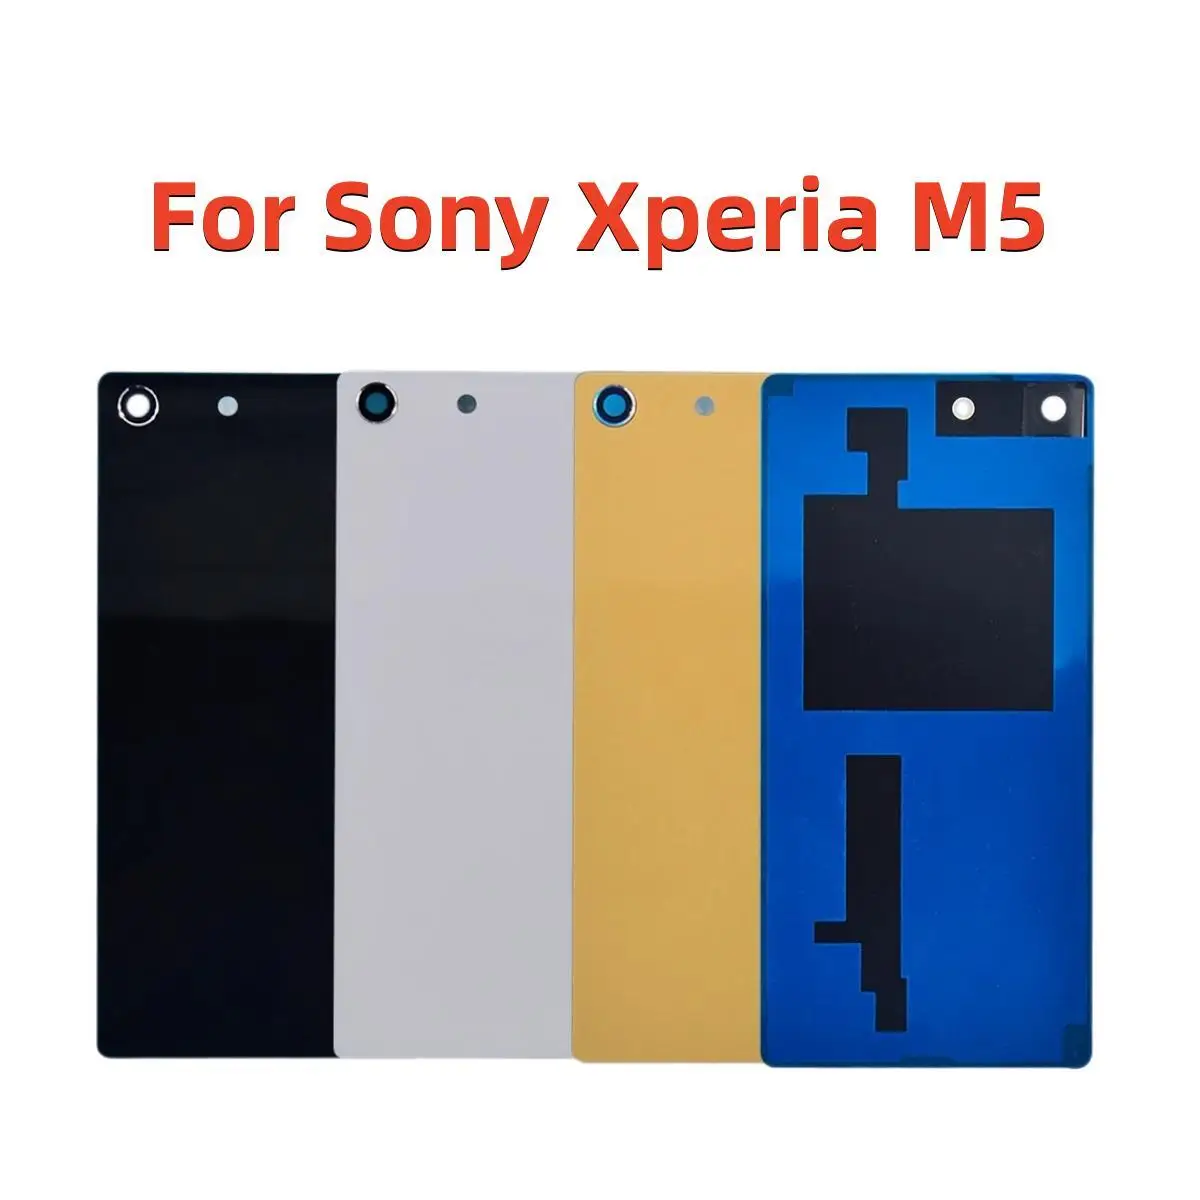 

For Sony Xperia M5 E5603 E5633 Back Battery Cover Glass Rear Door Case With NFC Connector +Sticker For Sony M5 Battery Cover